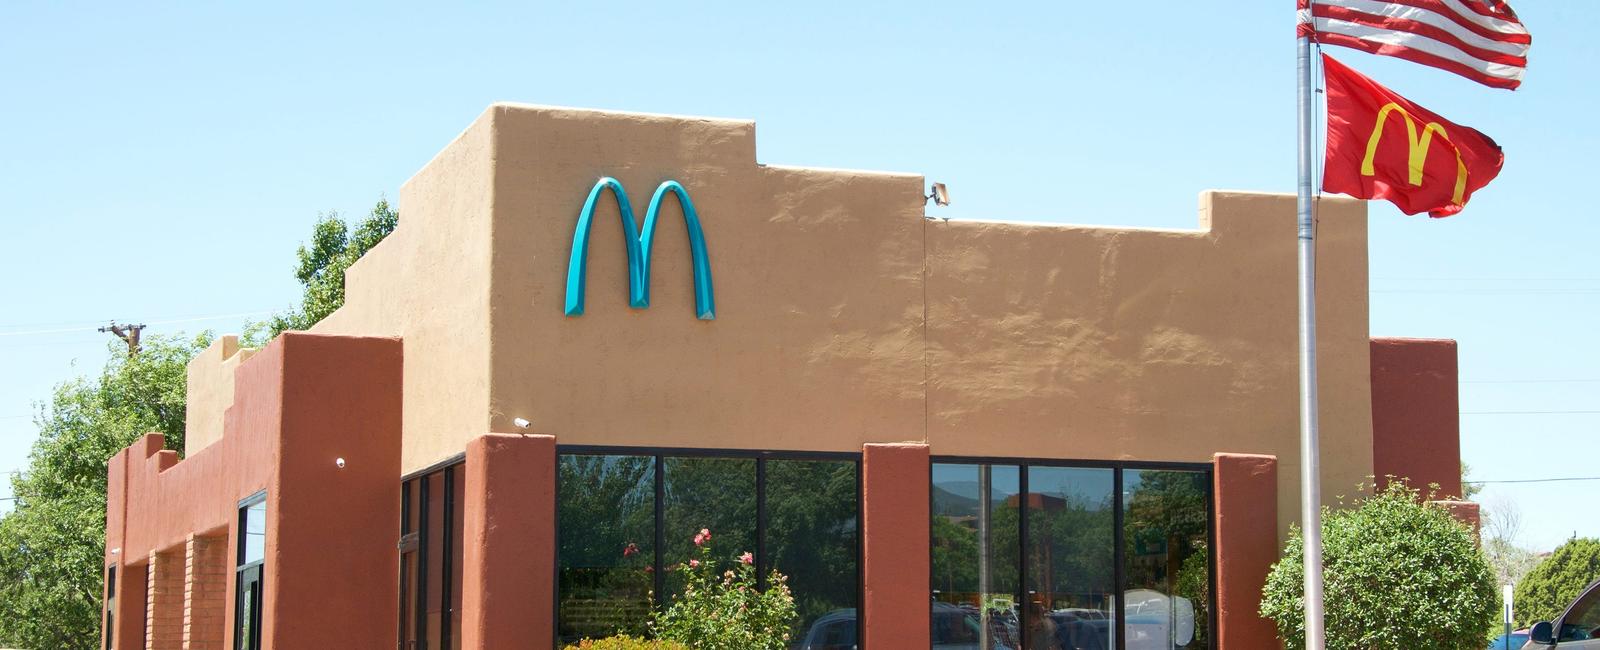 Only one mcdonald s in the world has turquoise arches government officials in sedona arizona thought the yellow would look bad with the natural red rock of the city